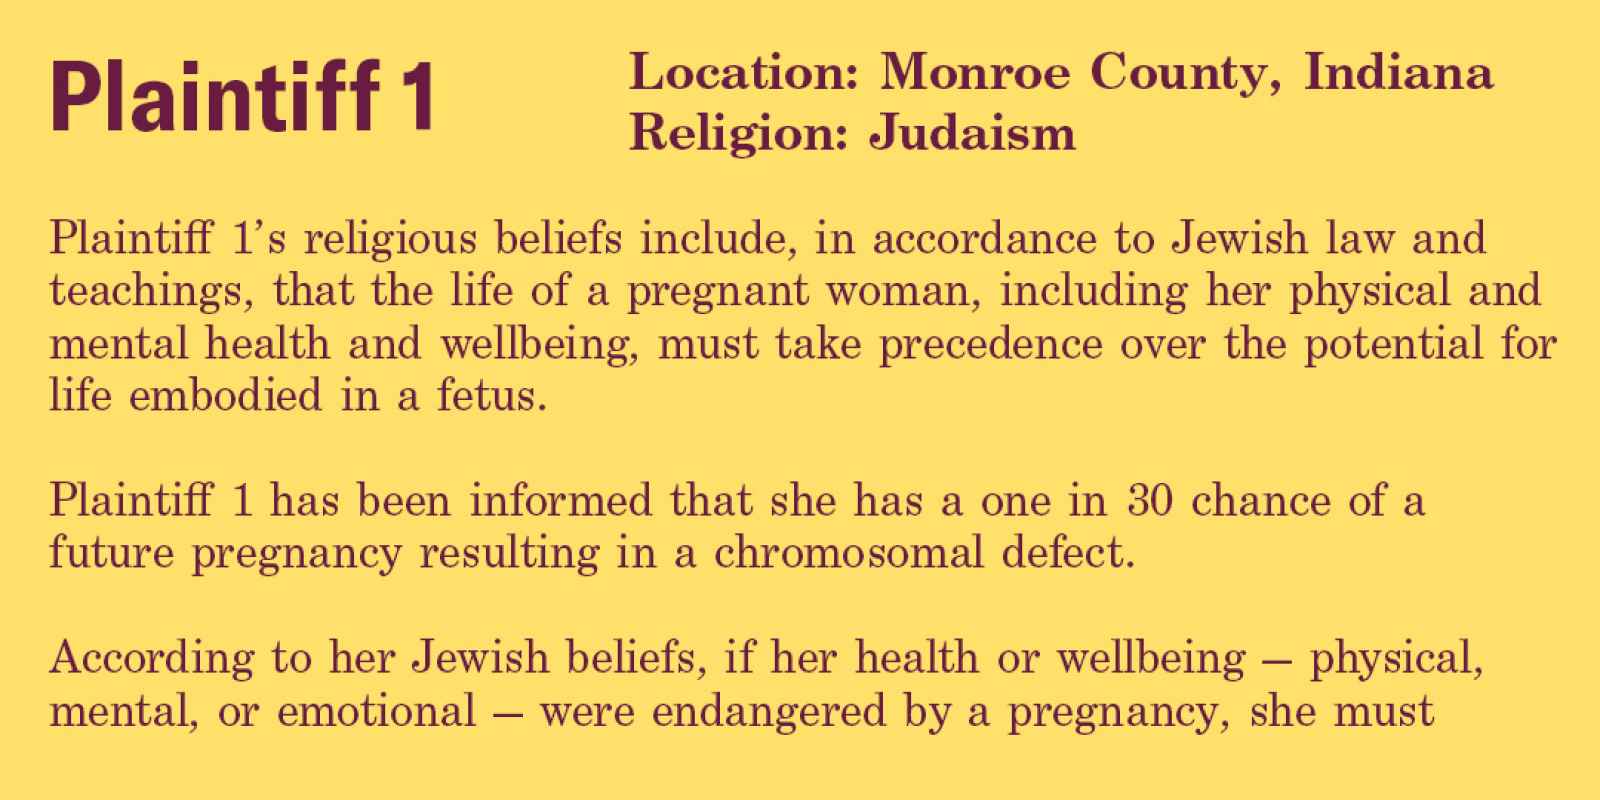 Plaintiff 1’s religious beliefs include, in accordance to Jewish law and teachings, that the life of a pregnant woman, including her physical and mental health and wellbeing, must take precedence over the potential for life embodied in a fetus.  Plaintiff